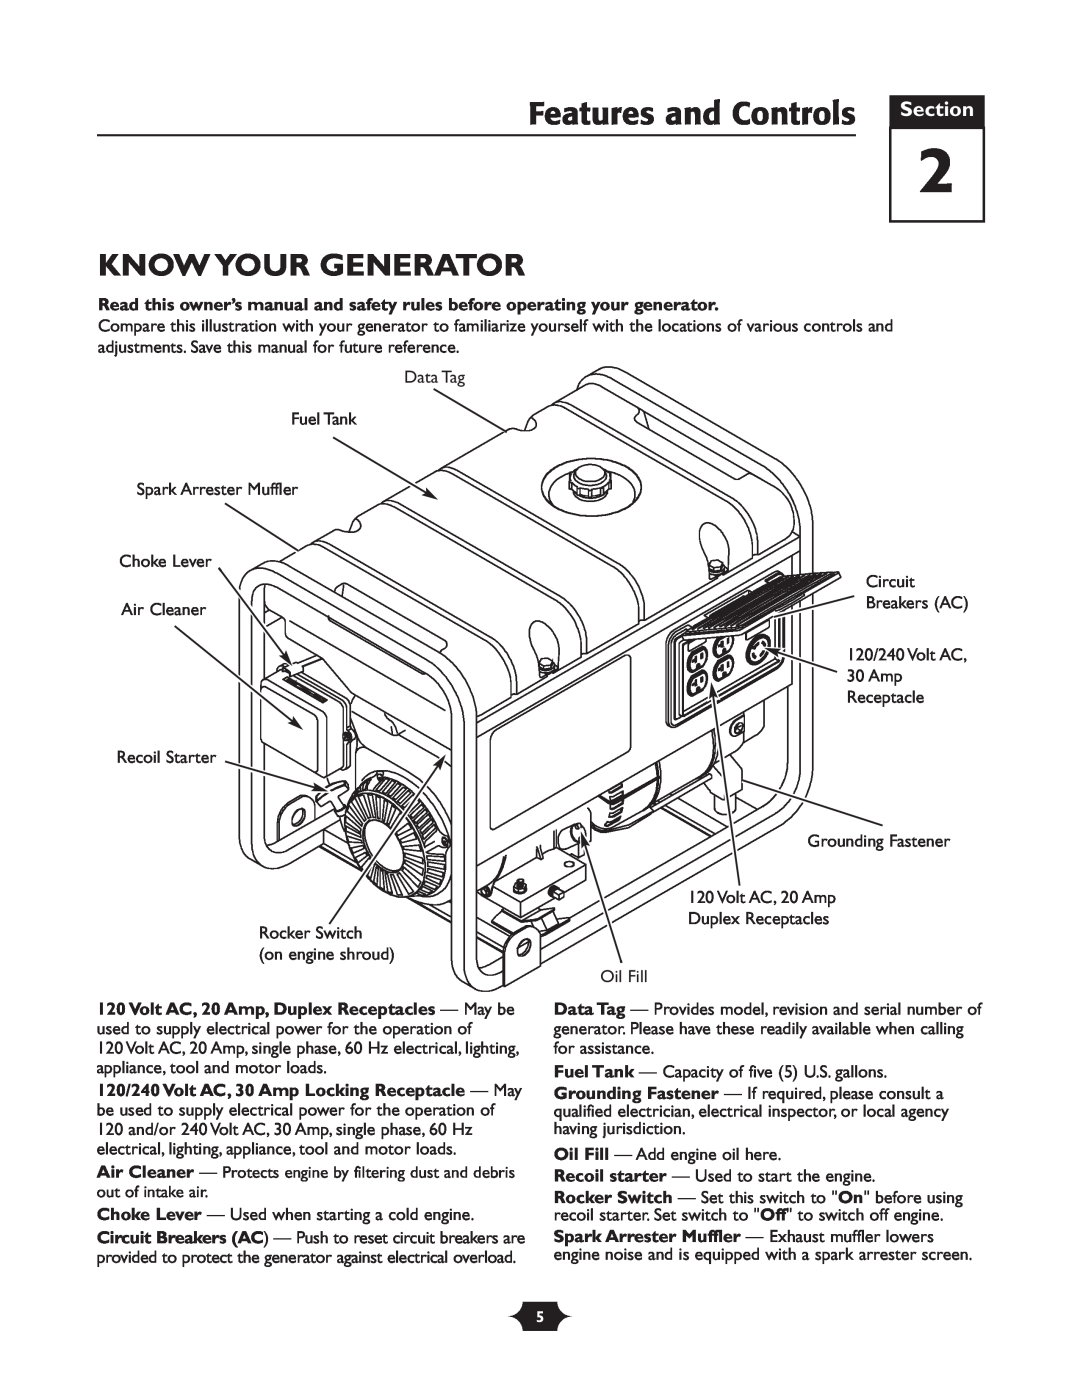 Troy-Bilt 1919 owner manual Features and Controls Section, Know Your Generator 